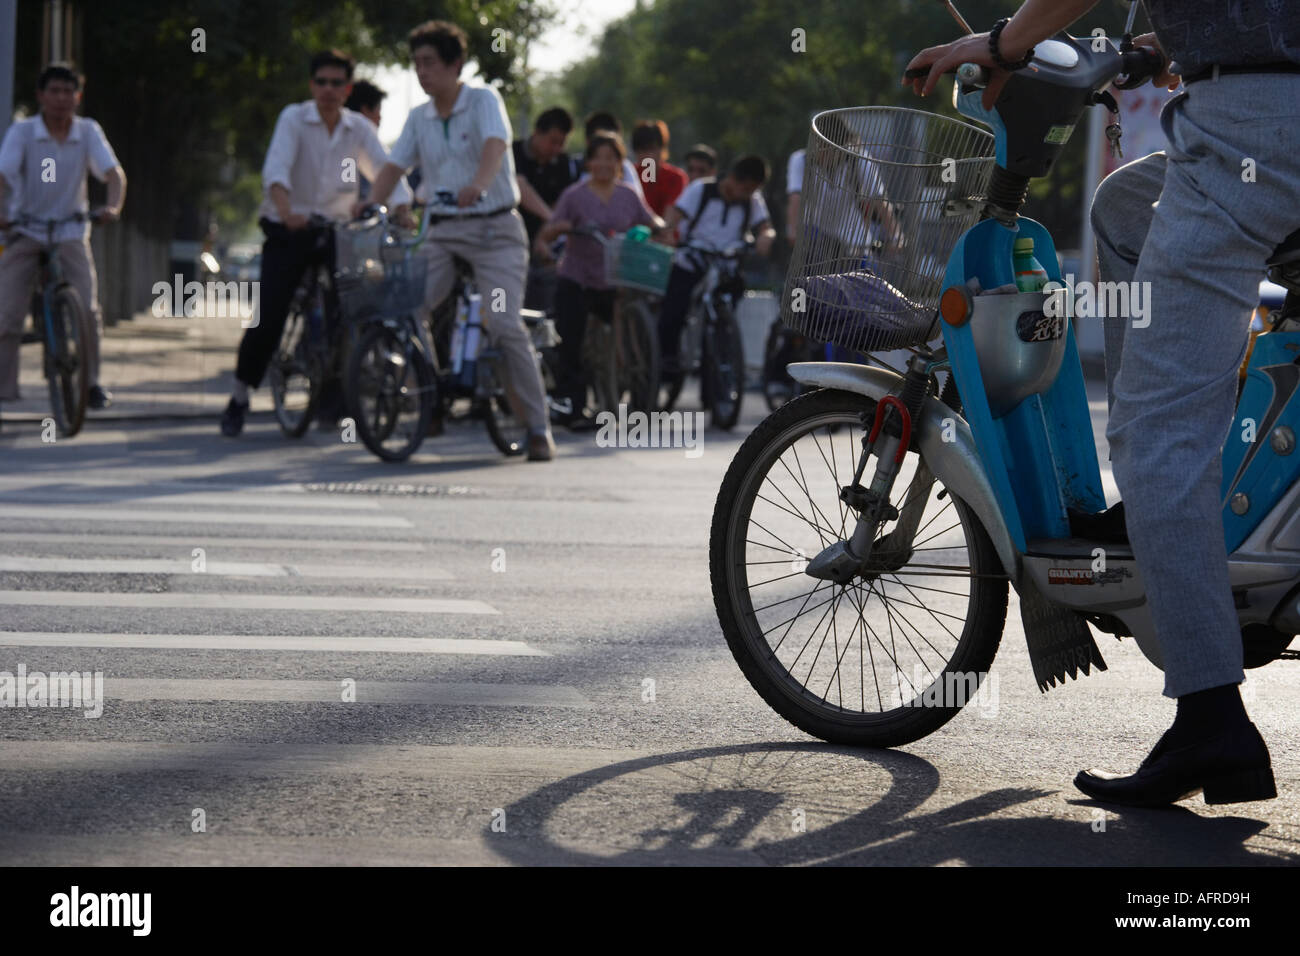 Motorcyclist and cyclists waiting at crossing, Beijing, China. Stock Photo